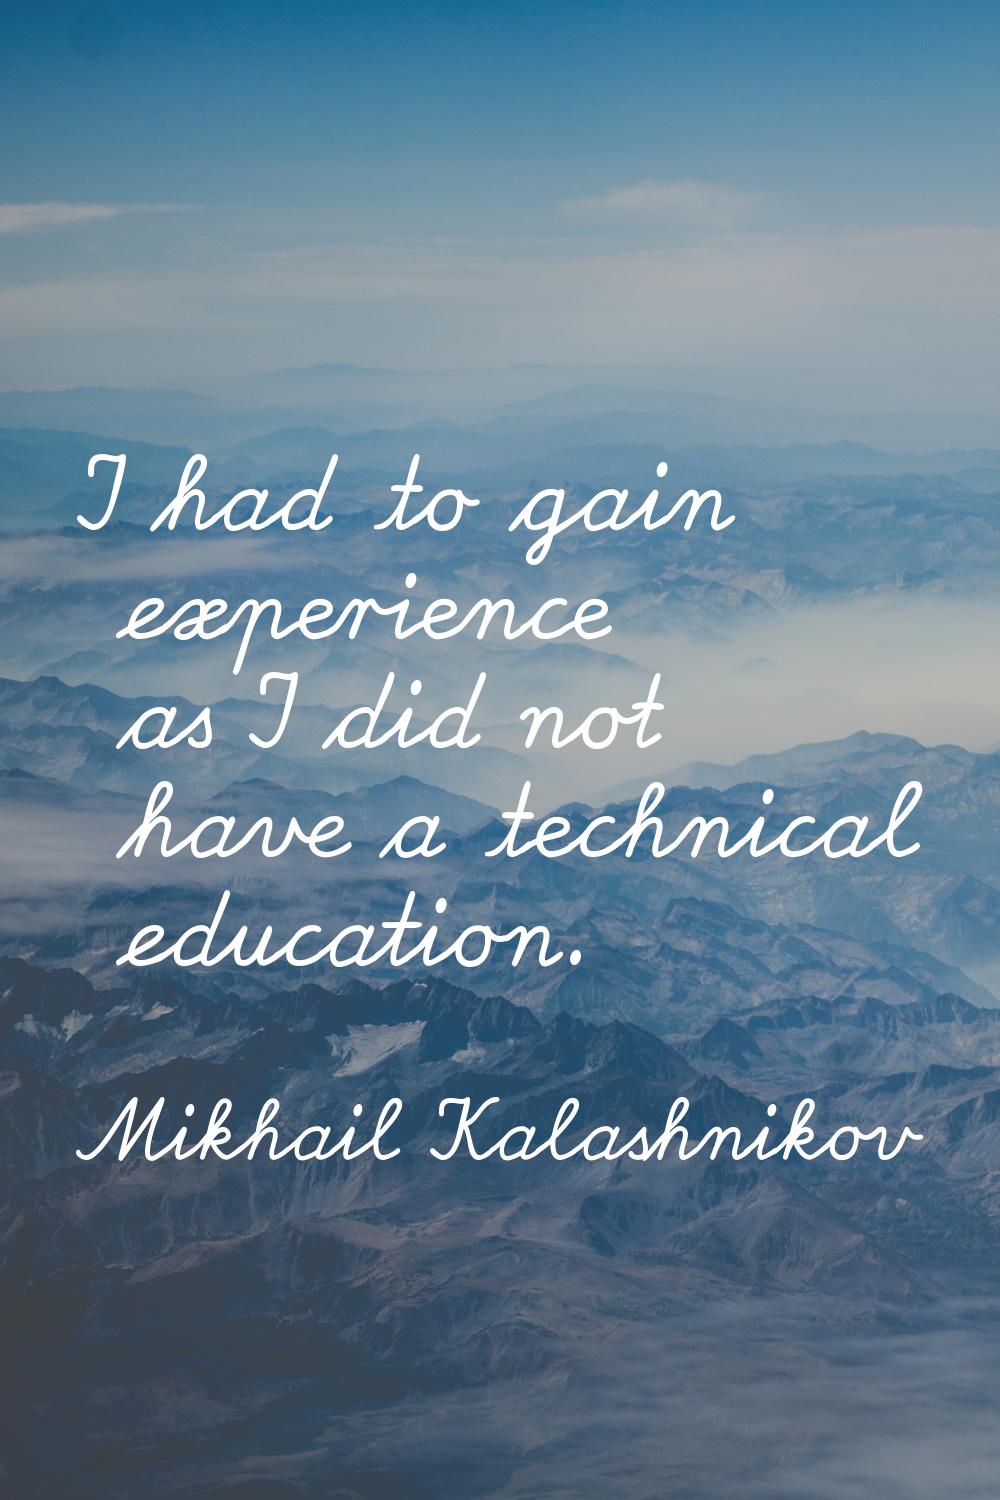 I had to gain experience as I did not have a technical education.